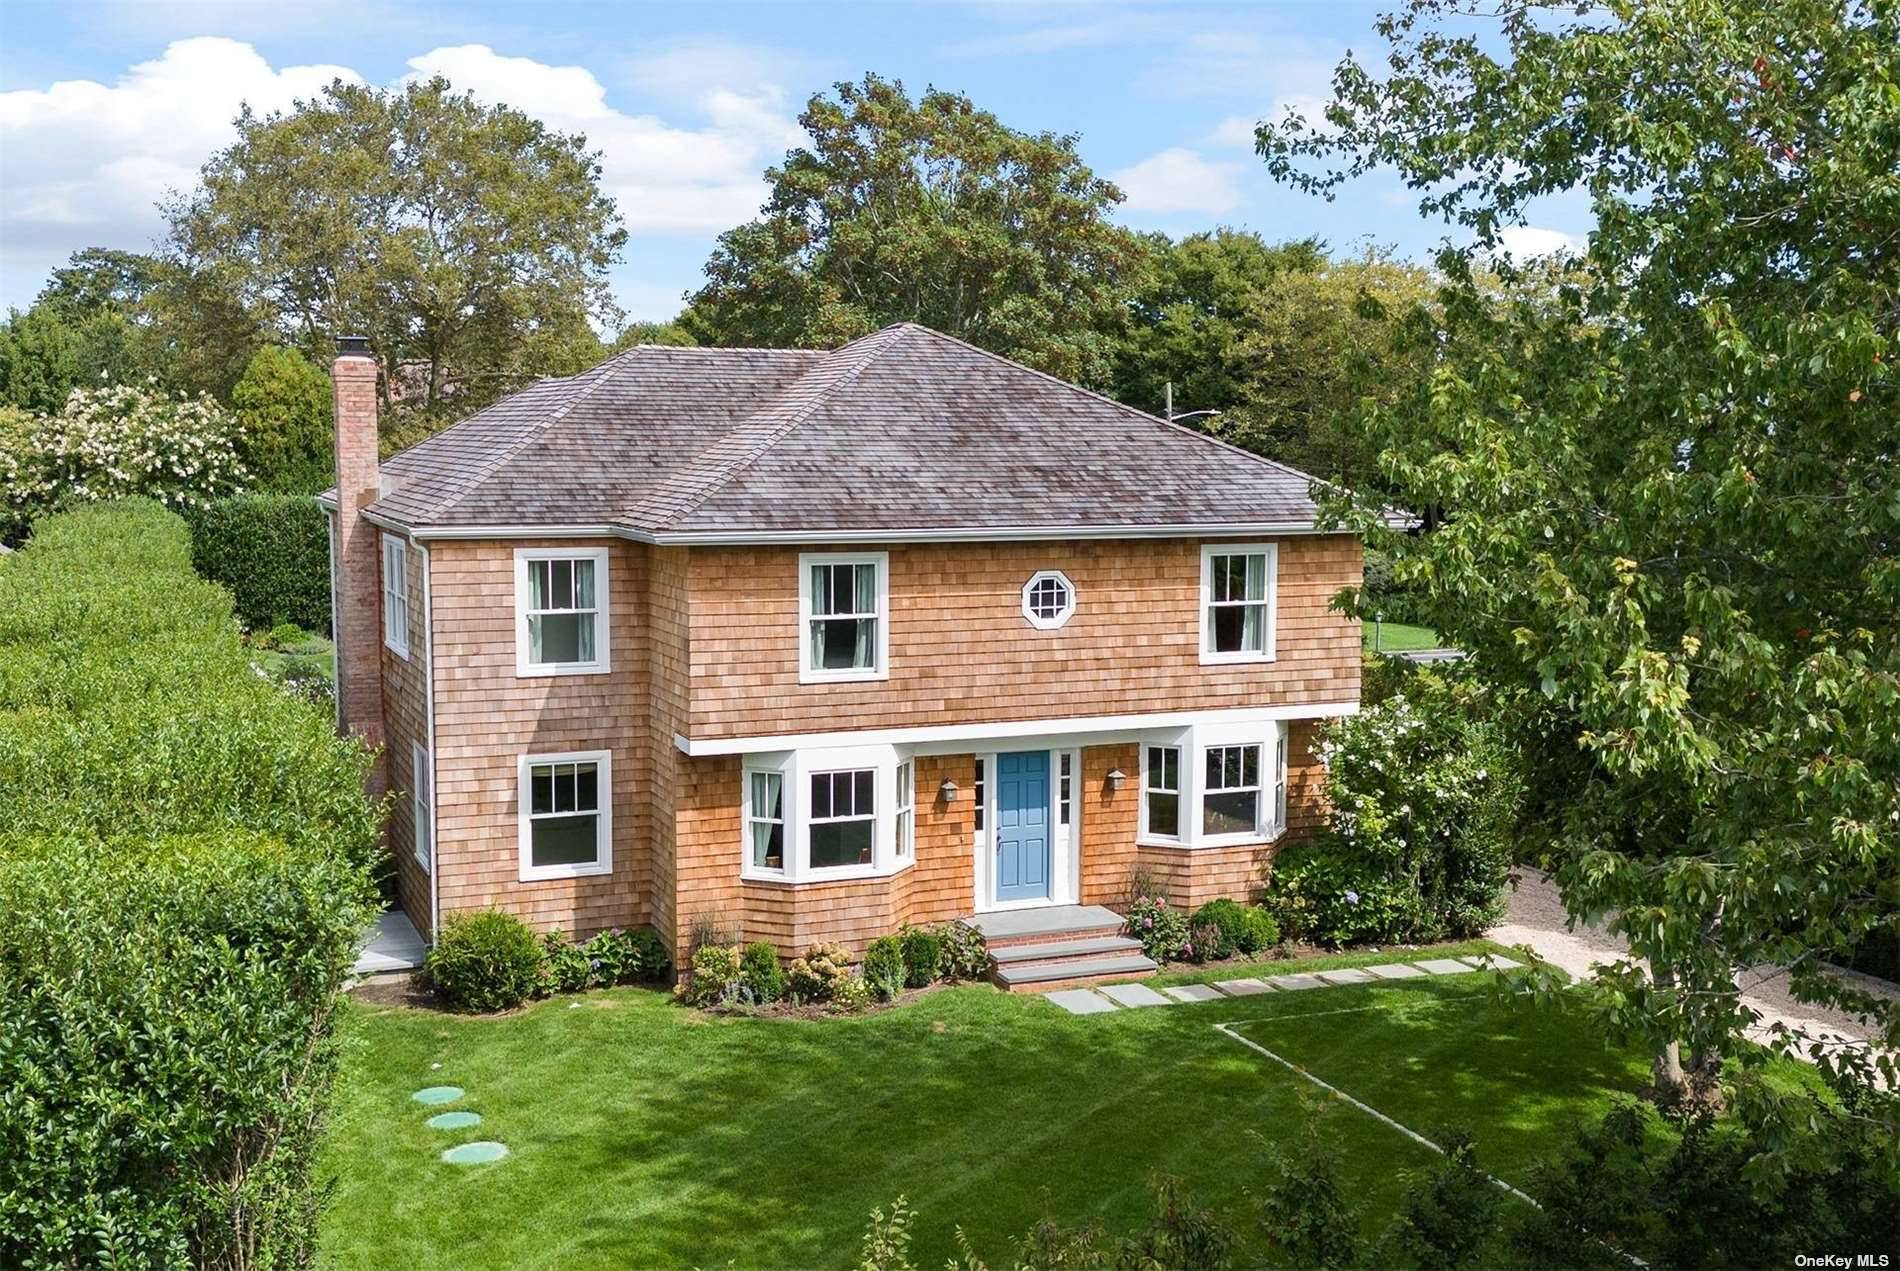 This 6 bedroom, 4. 5 bathroom classic cottage spans 3, 620 sf over 3 levels and in the most desirable location between Wyandanch Lane and Little Plains Road ; a ...